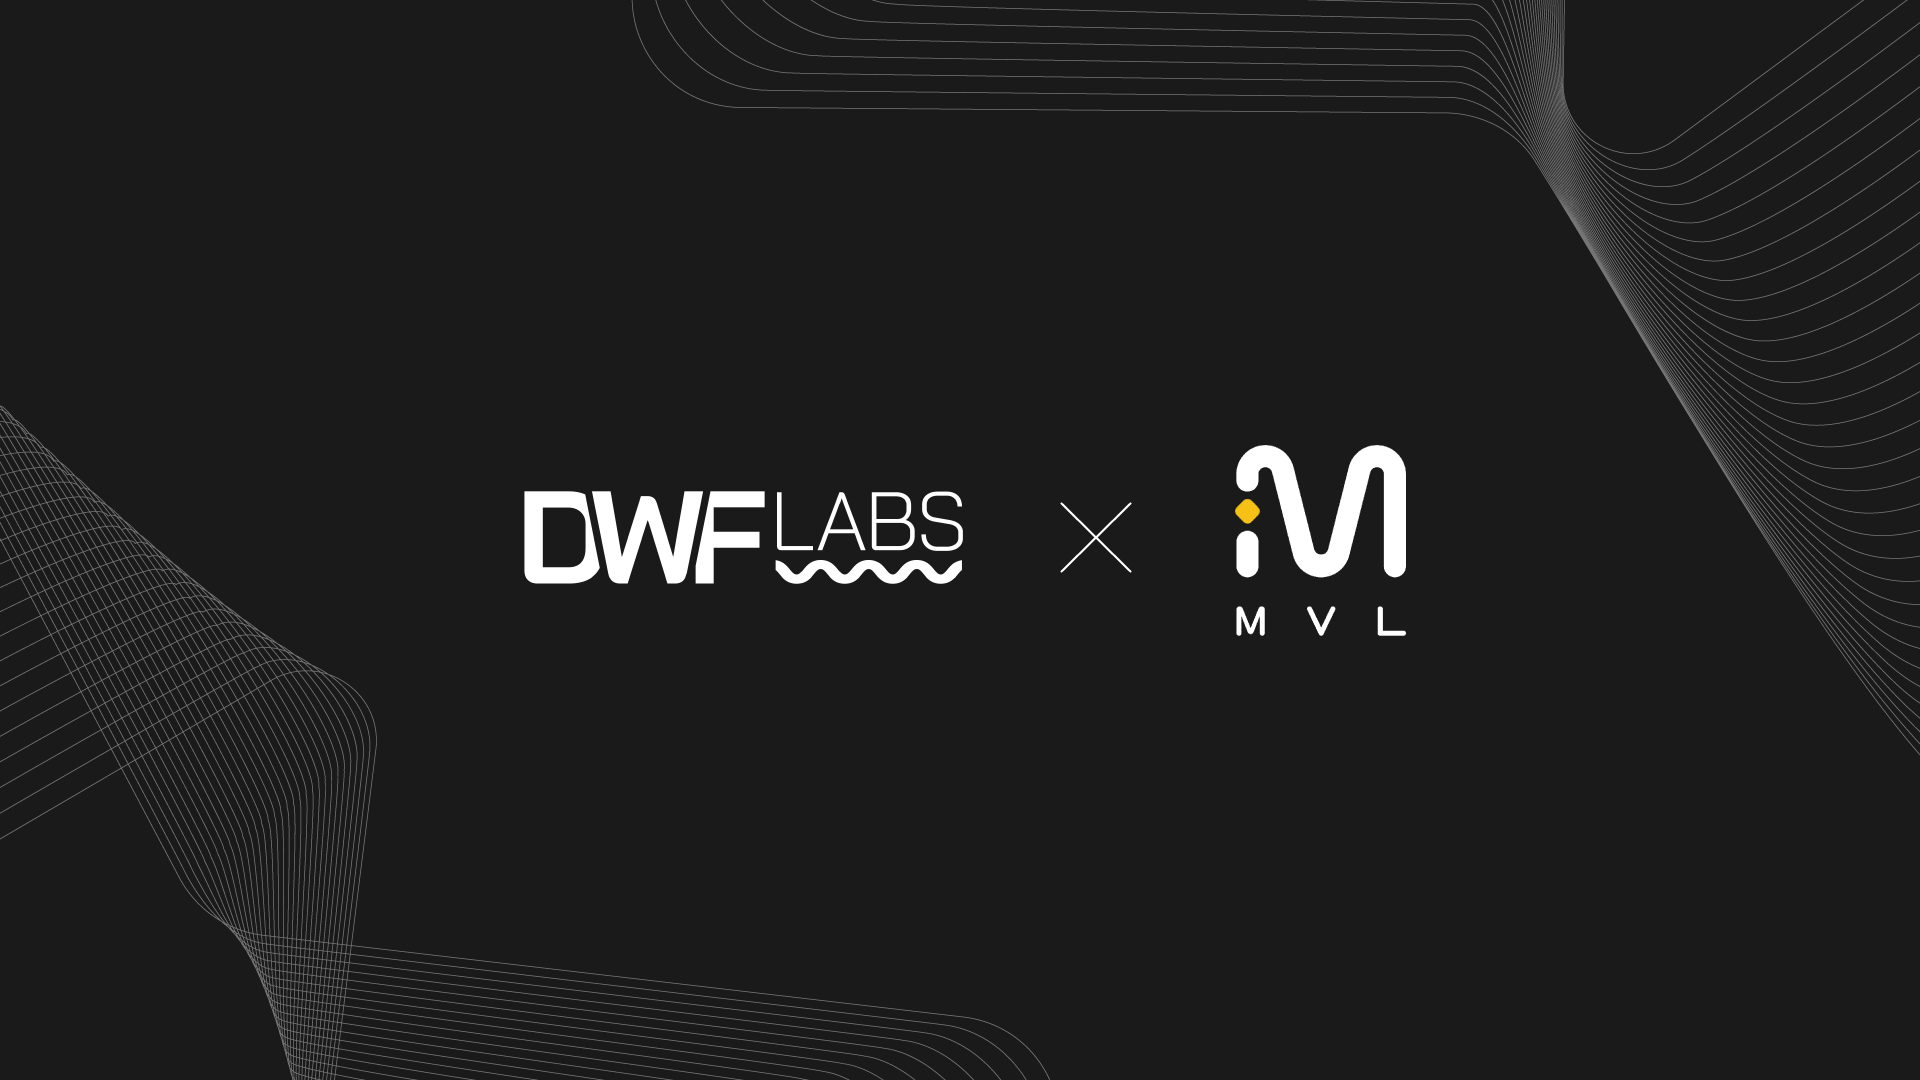 MVL and DWF Labs Partner to Rapidly Expand the Web3 Mobility Ecosystem in Asia